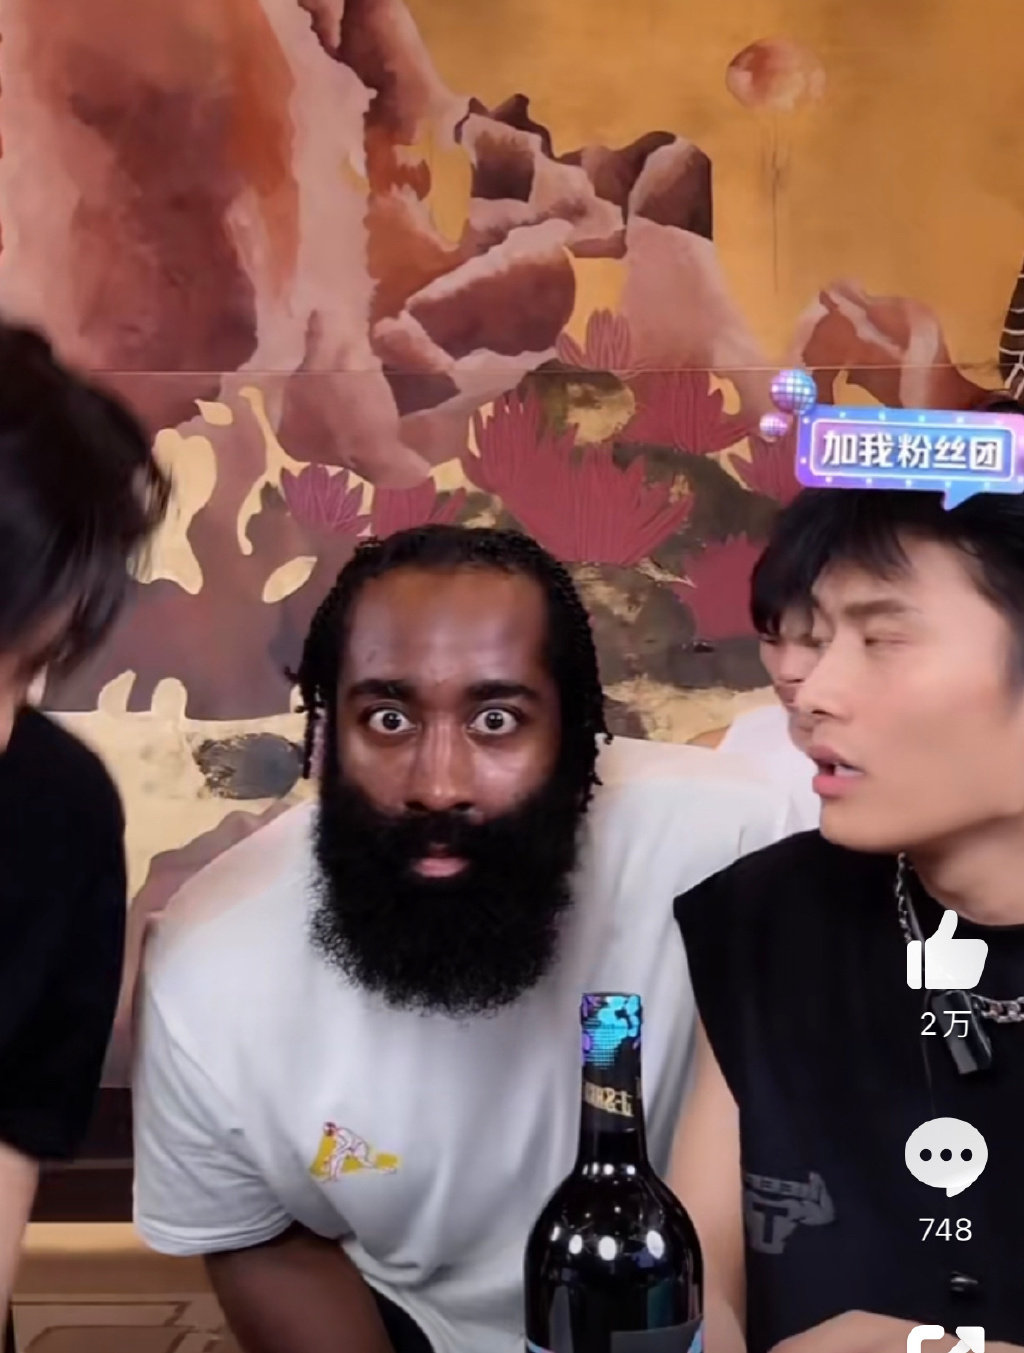 James Harden was left in disbelief after an appearance on a Chinese influencer’s live stream brought 10,000 sales of his personal brand of wine in seconds.